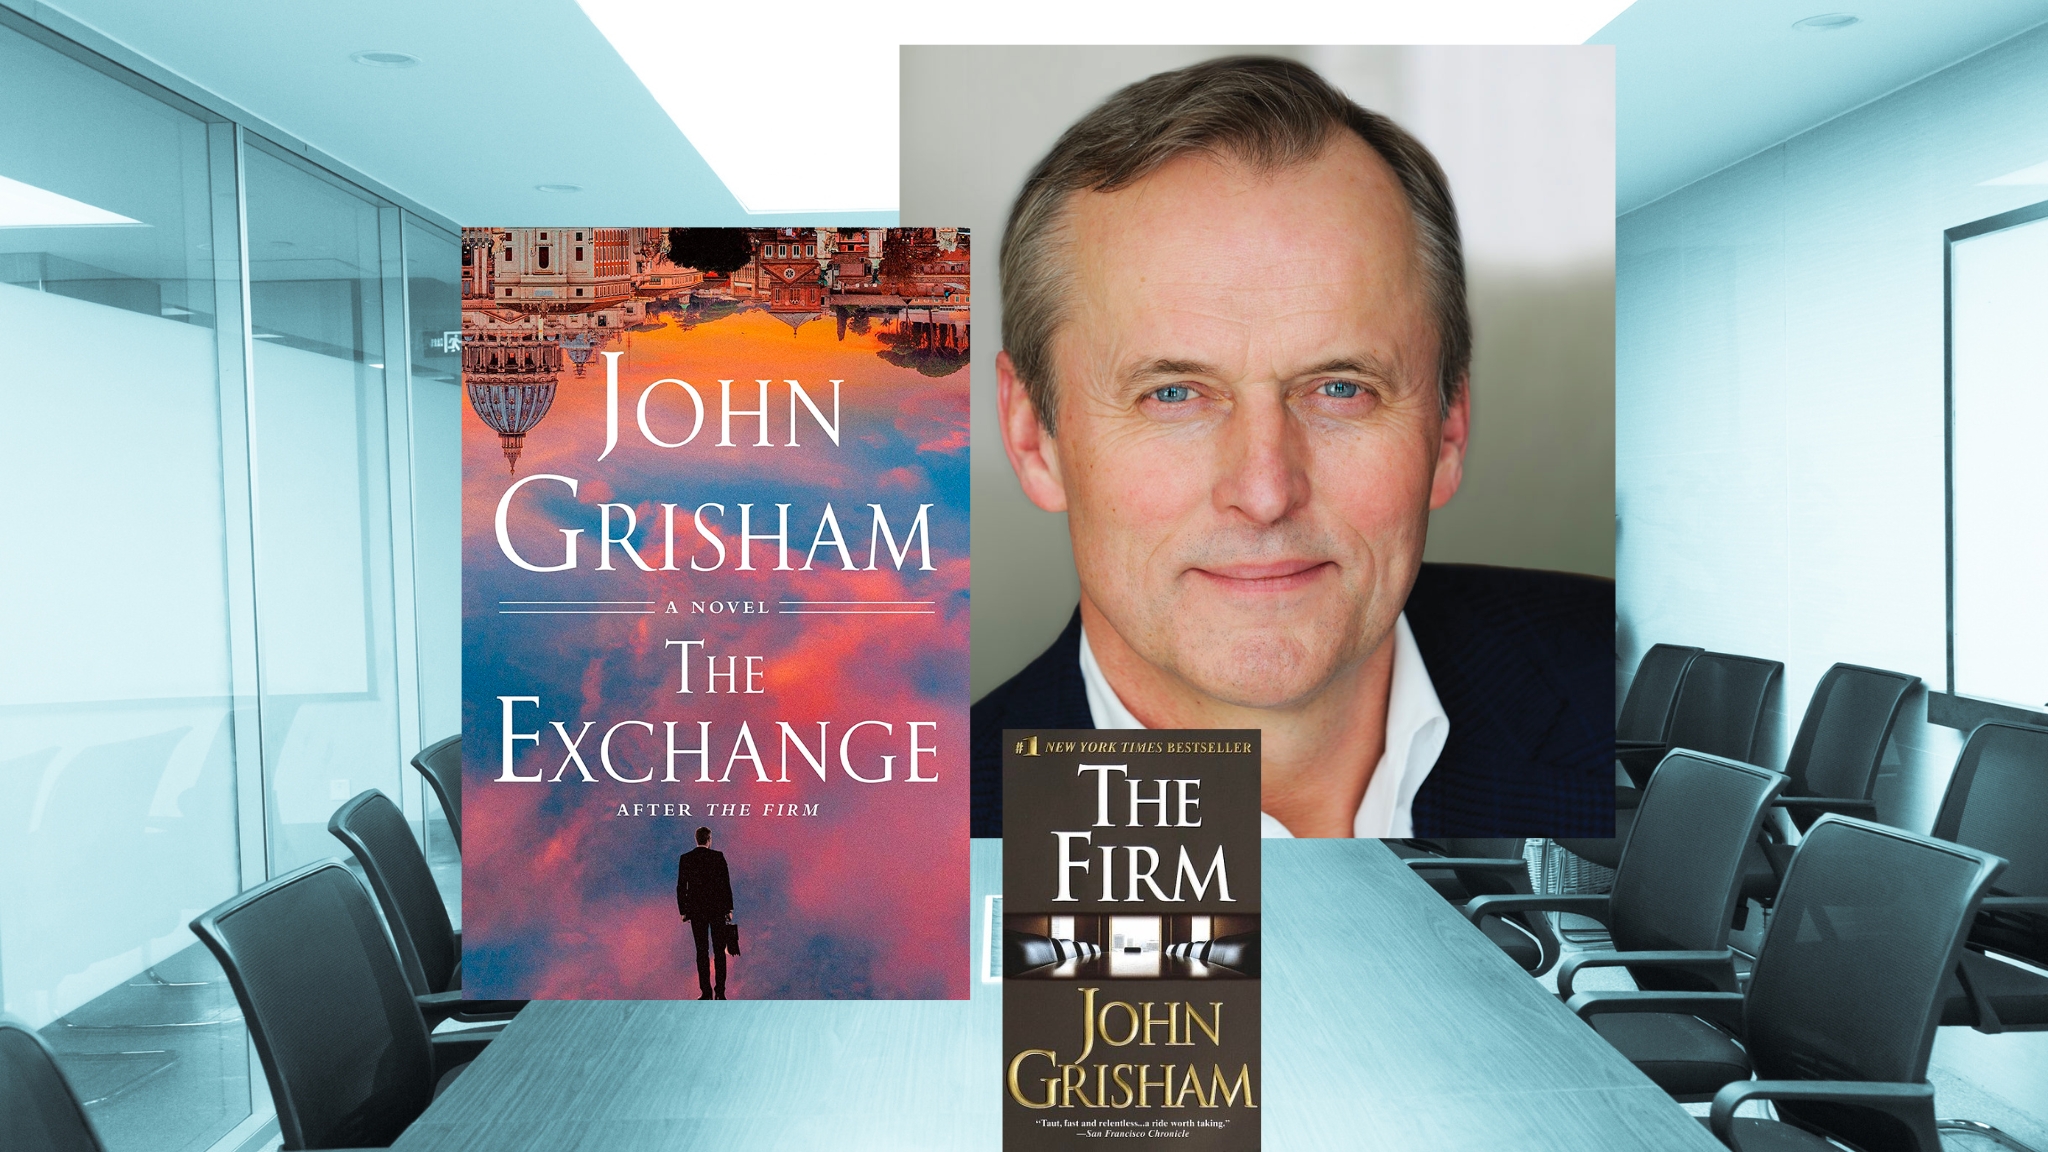 John Grisham Announces Sequel to Bestselling Legal Thriller “The Firm”